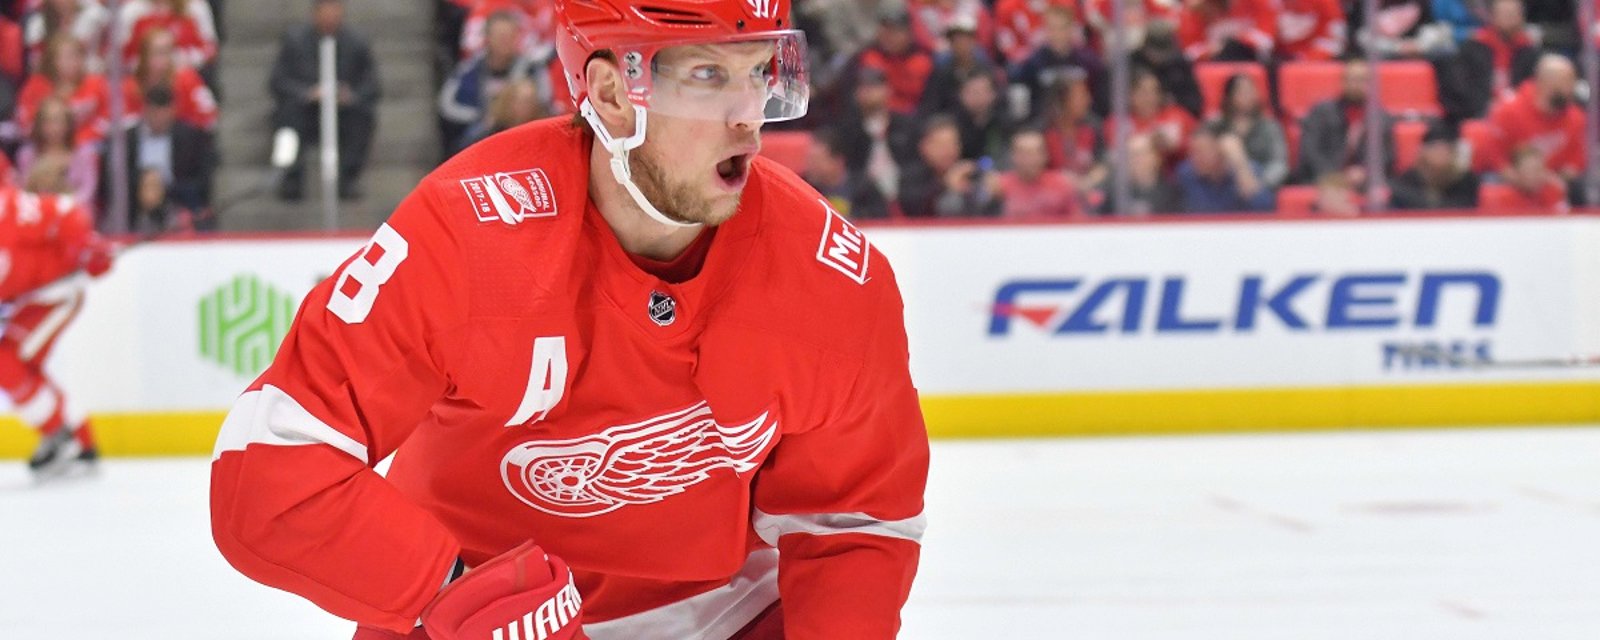 4 Red Wings get an “F” grade for their performance this season.